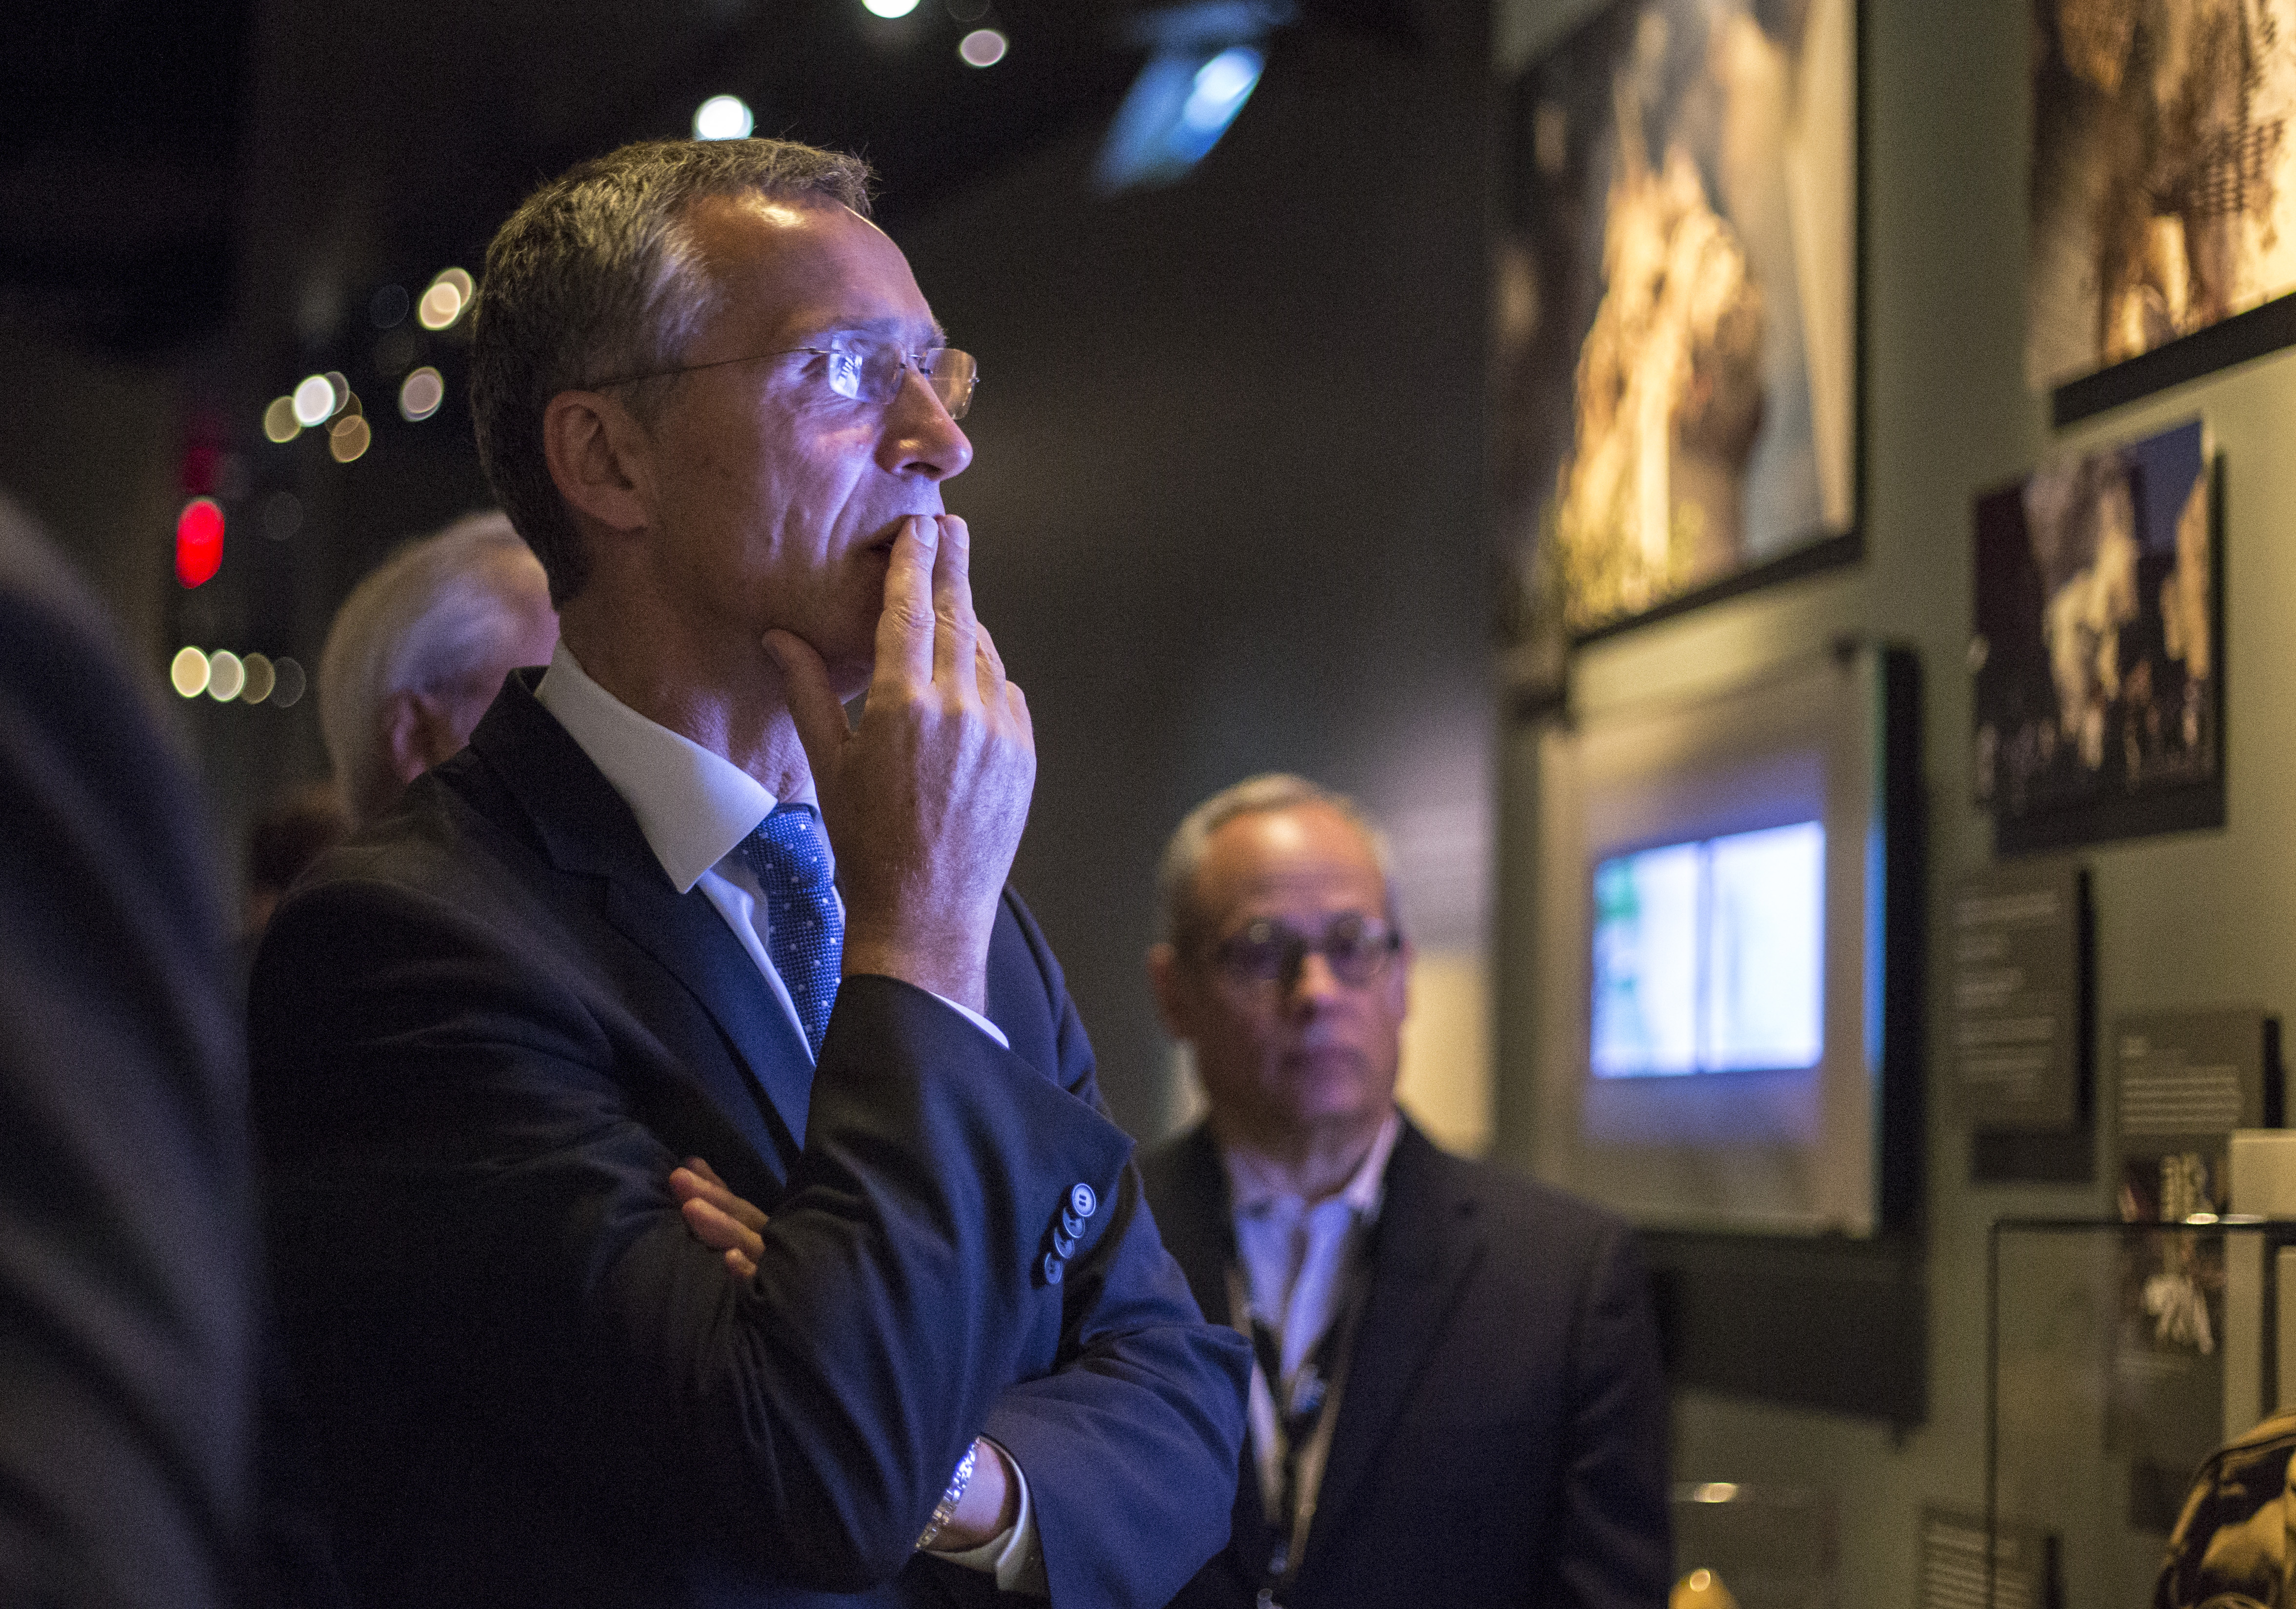 NATO Secretary General Jens Stoltenberg puts his hand to his mouth as he looks at an installation at the 9/11 Memorial Museum.